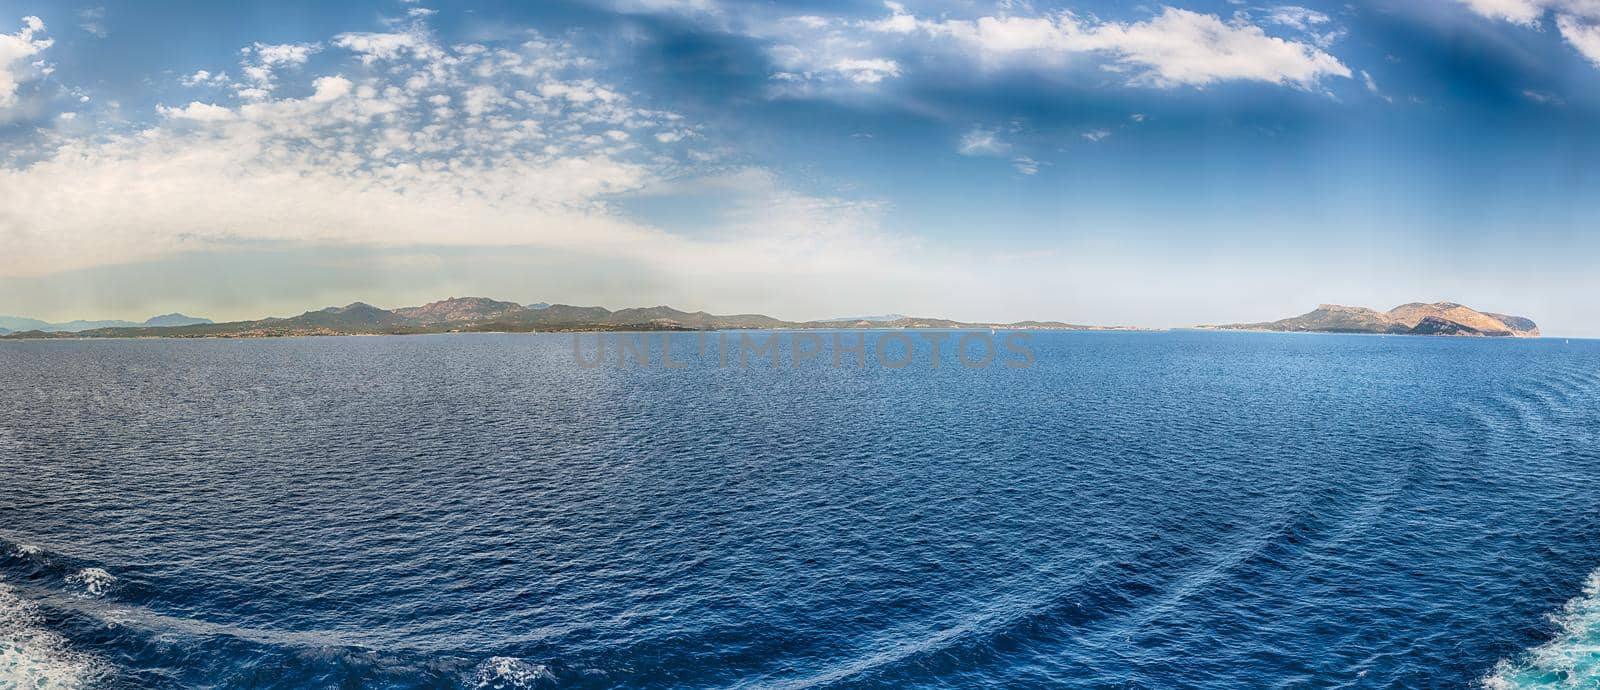 Panoramic view over the coast near Olbia, in the northern part of Sardinia, Italy